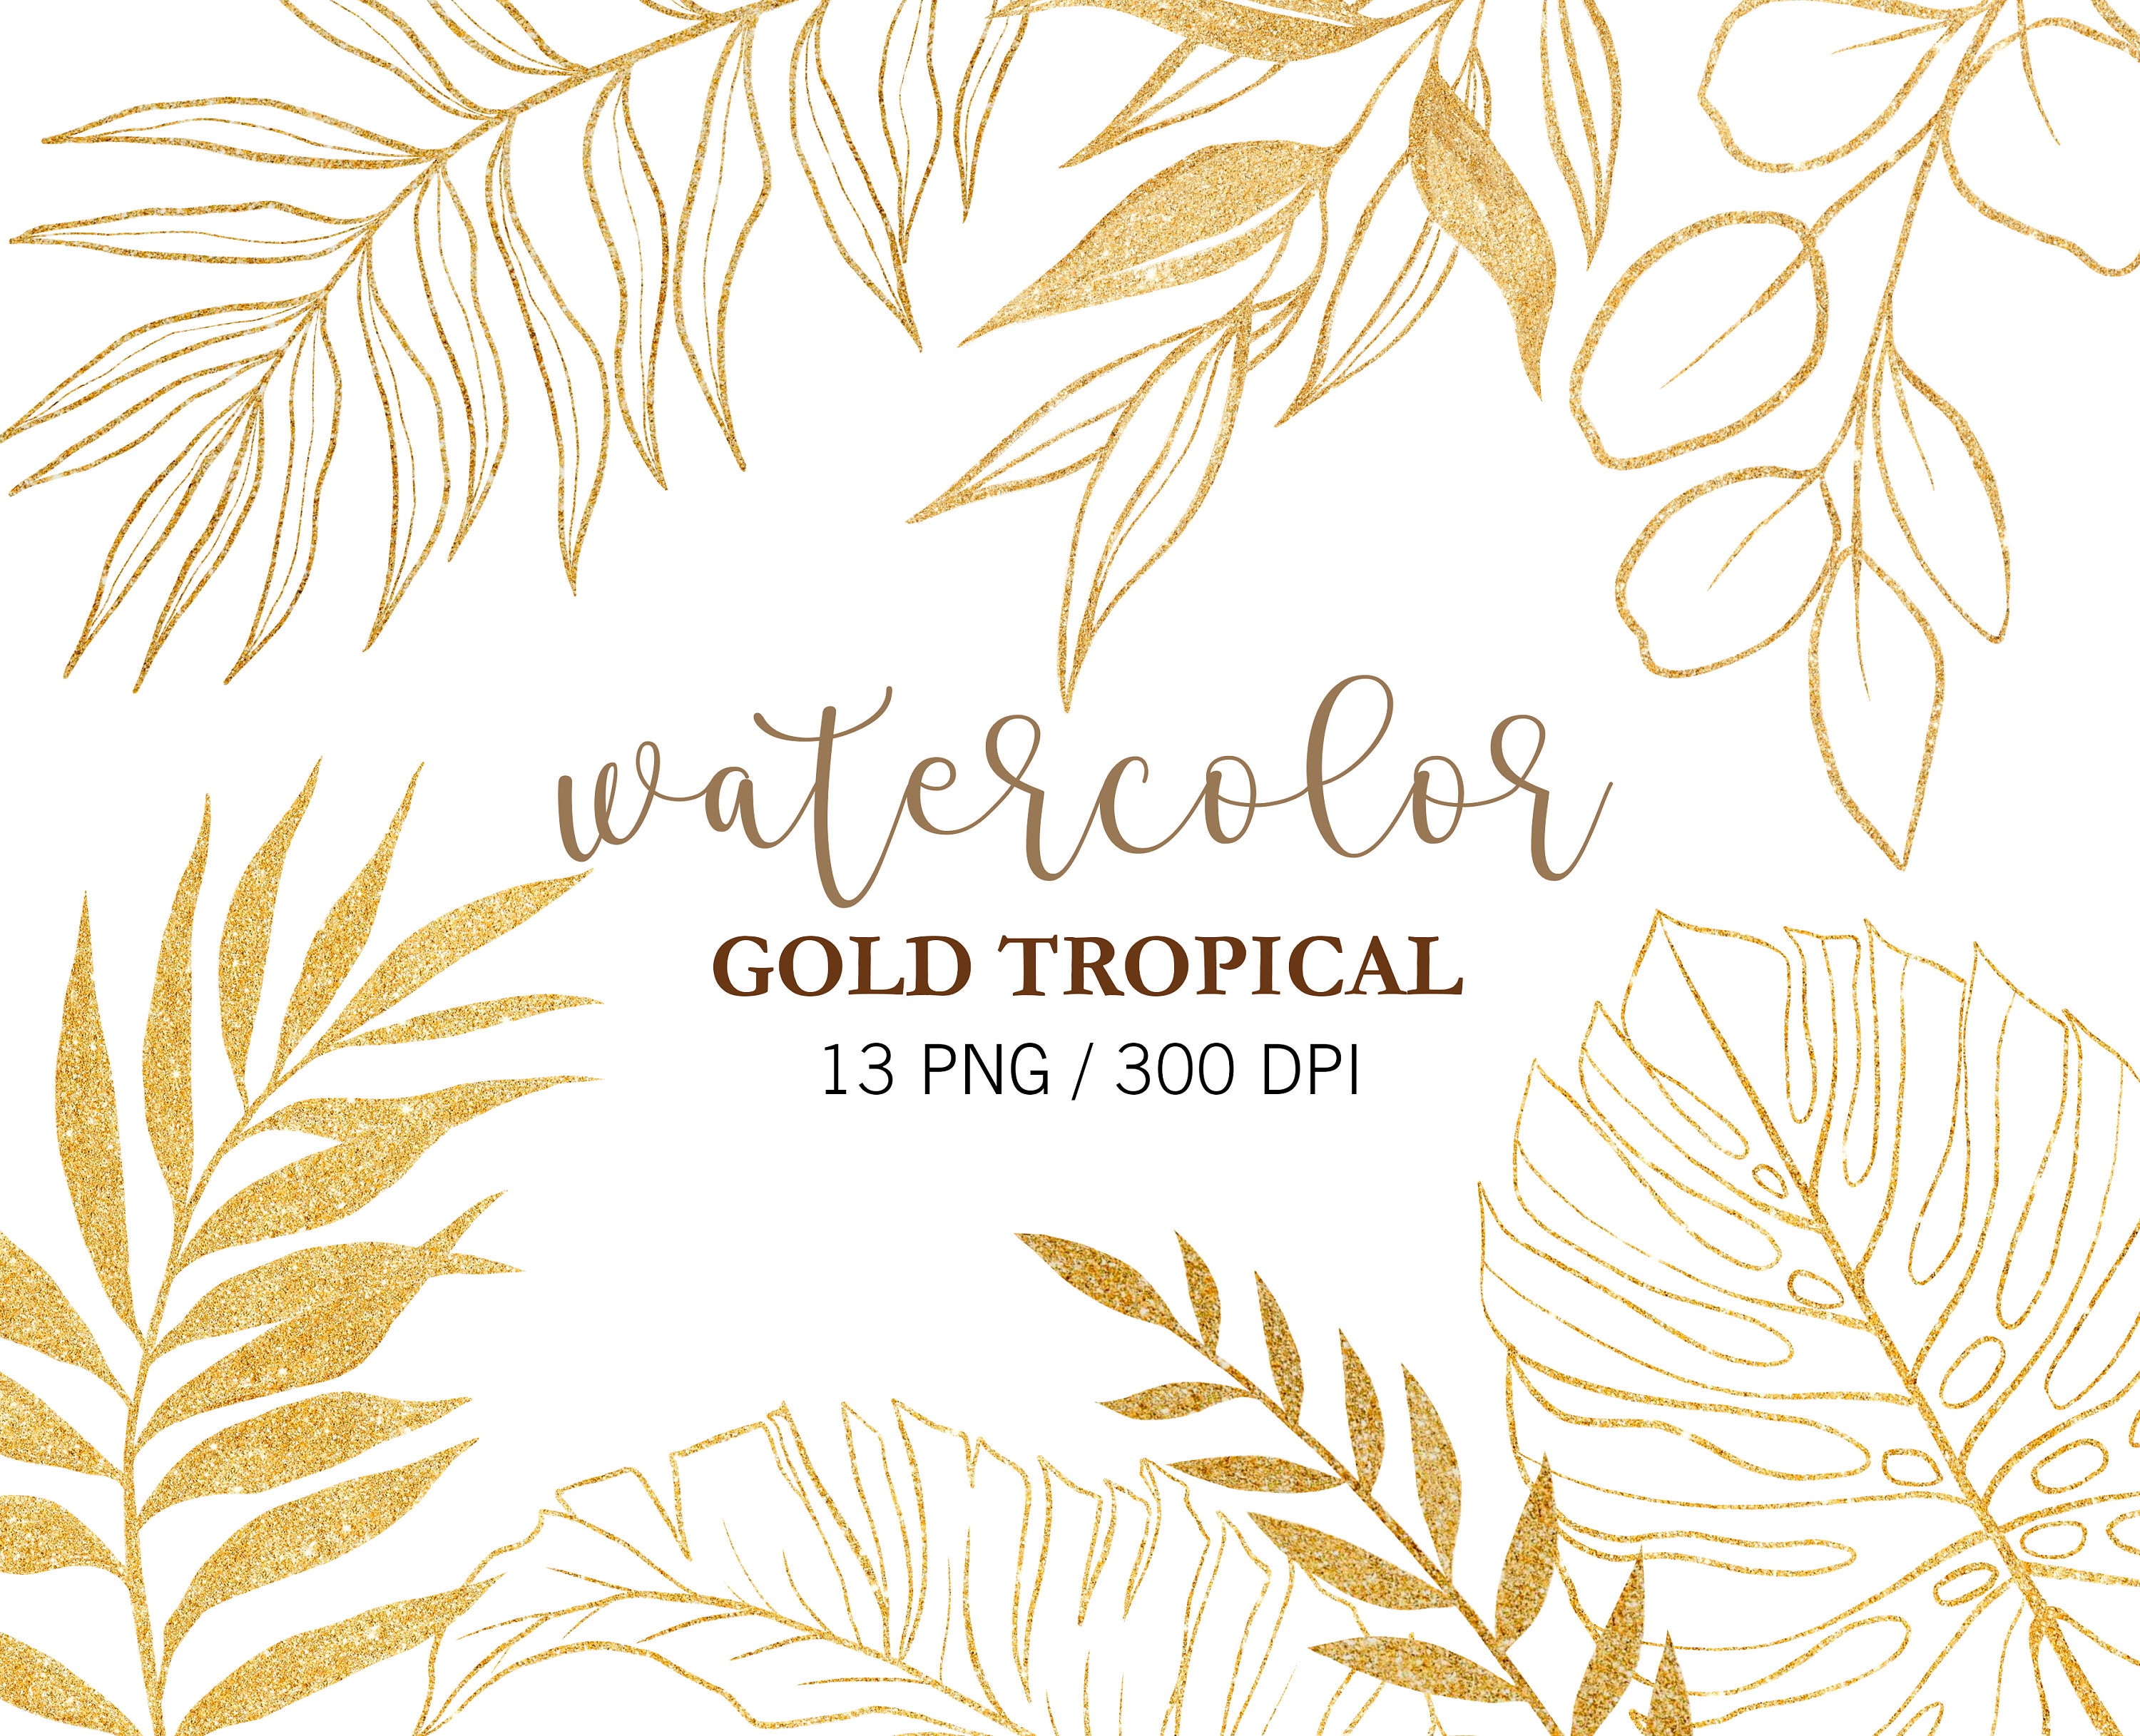 Gold Tropical Leaves Clipart, Doodle Clipart, Tropical Plant, PNG, Glitter  Palm Leaf, Jungle Clipart, Gold Leaves, Wedding Invitation, DIY 